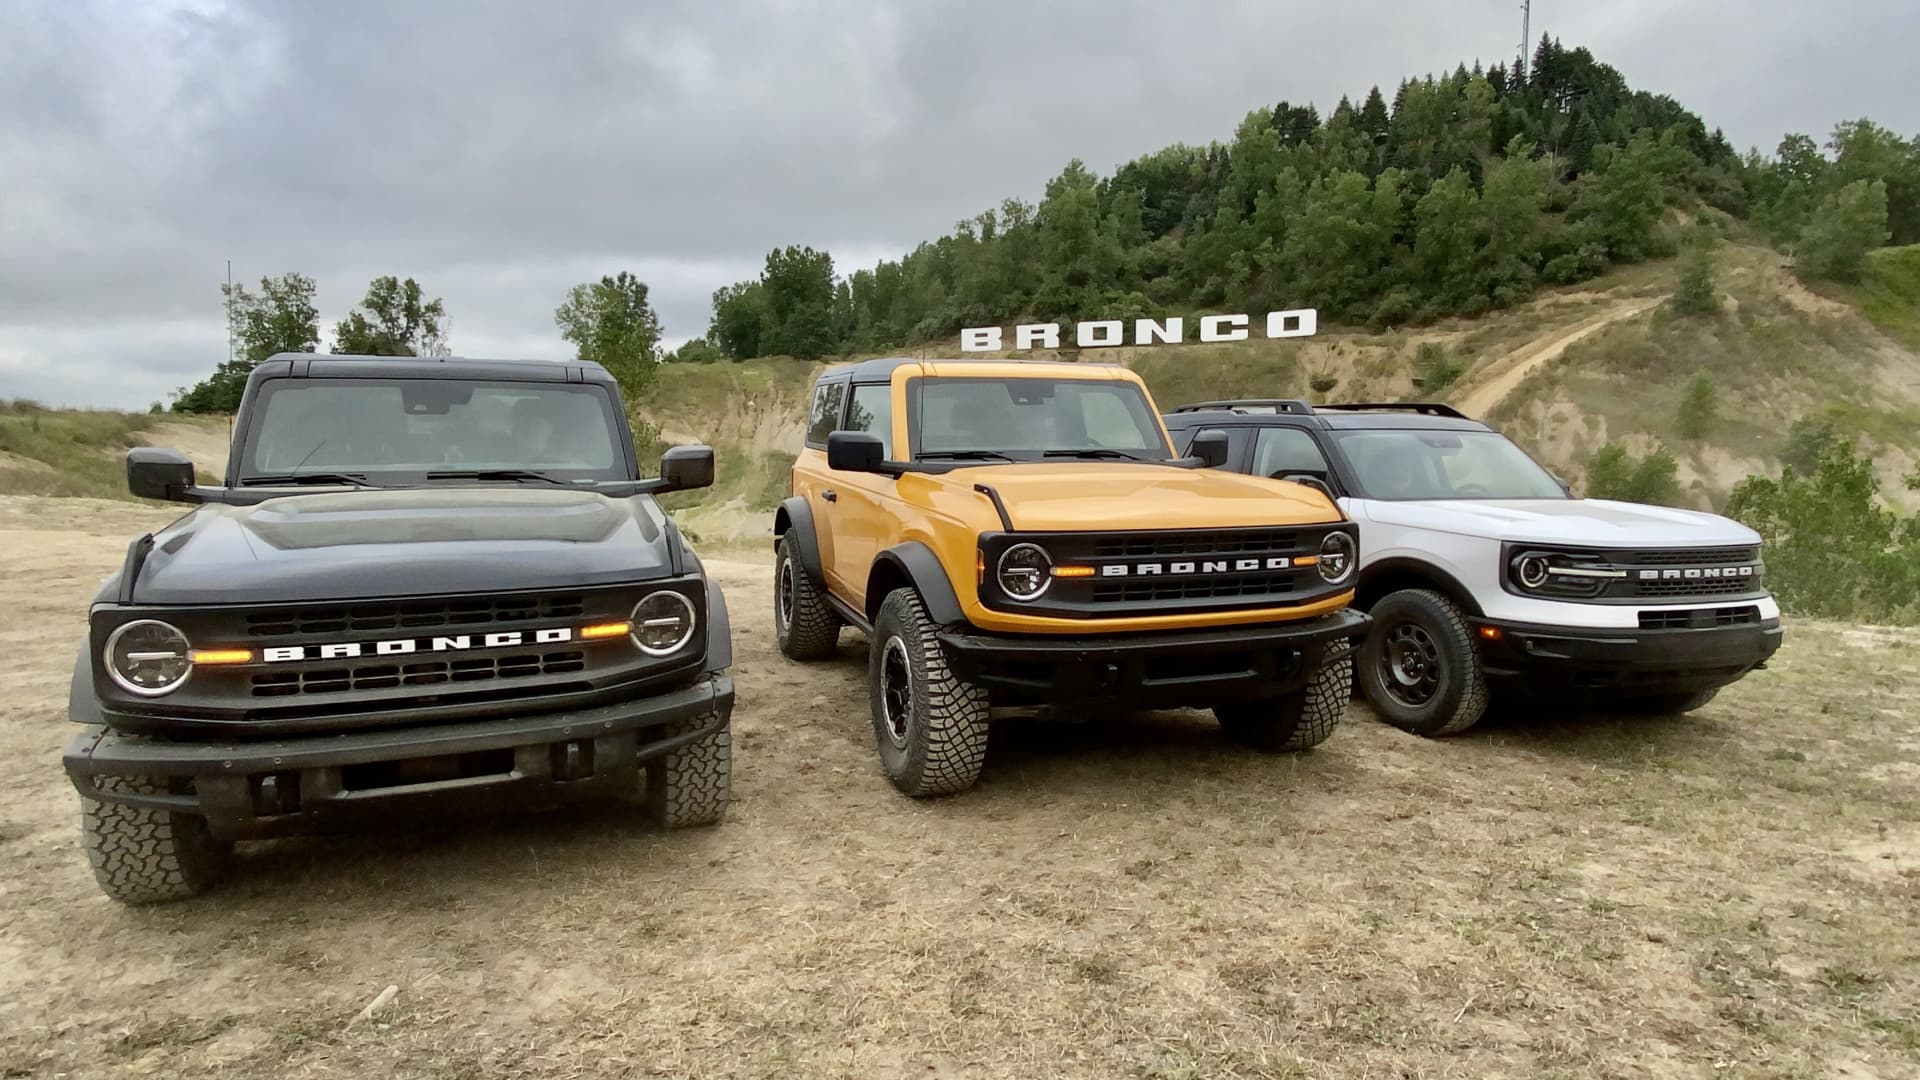 Ford's new 2021 Bronco lineup -- four- and two-door Bronco models and the Bronco Sport (left to right) -- displayed at an off-road course on Aug. 11, 2020 in Michigan.